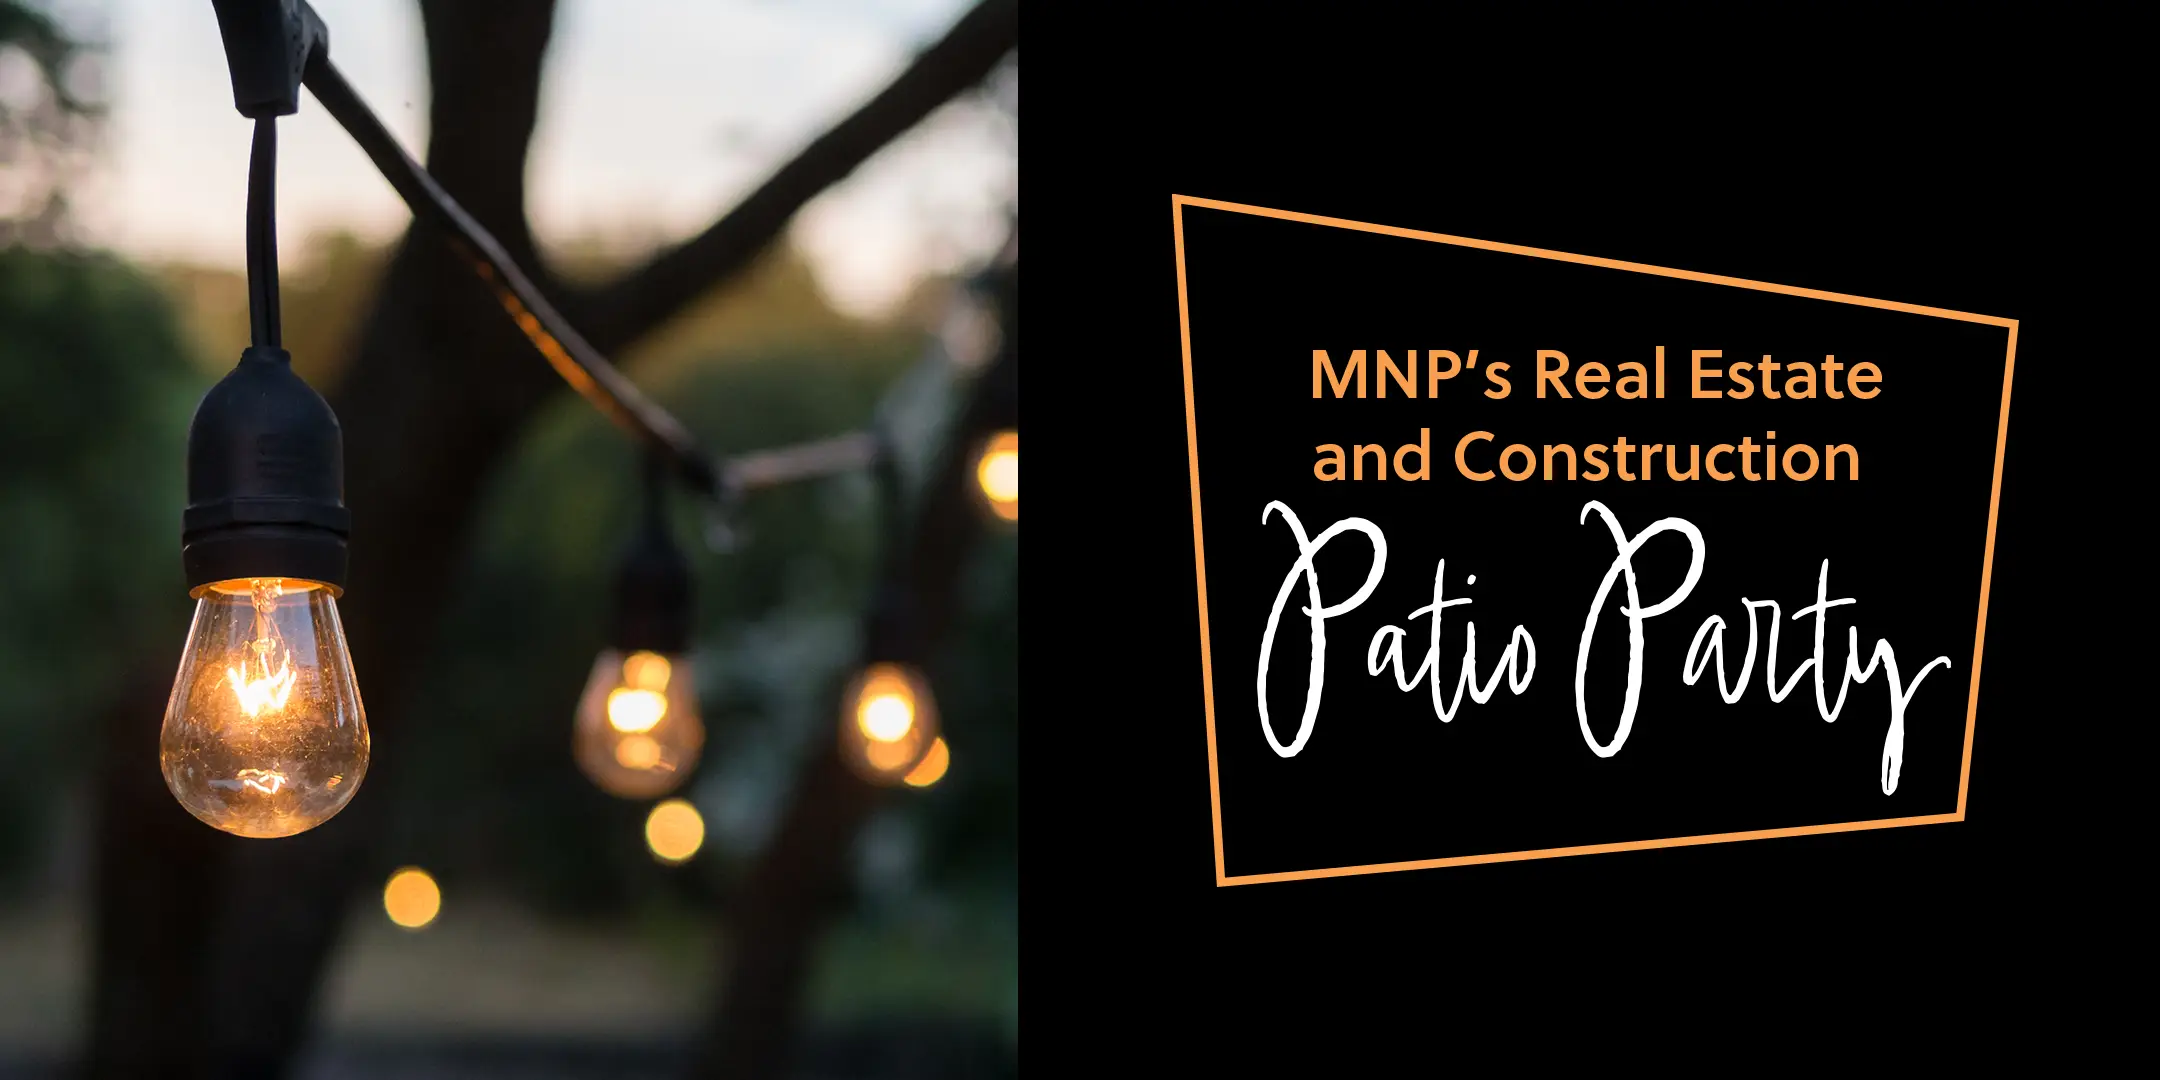 String lights lit up on a patio with the title "MNP's Real Estate and Construction Patio Party" next to it.